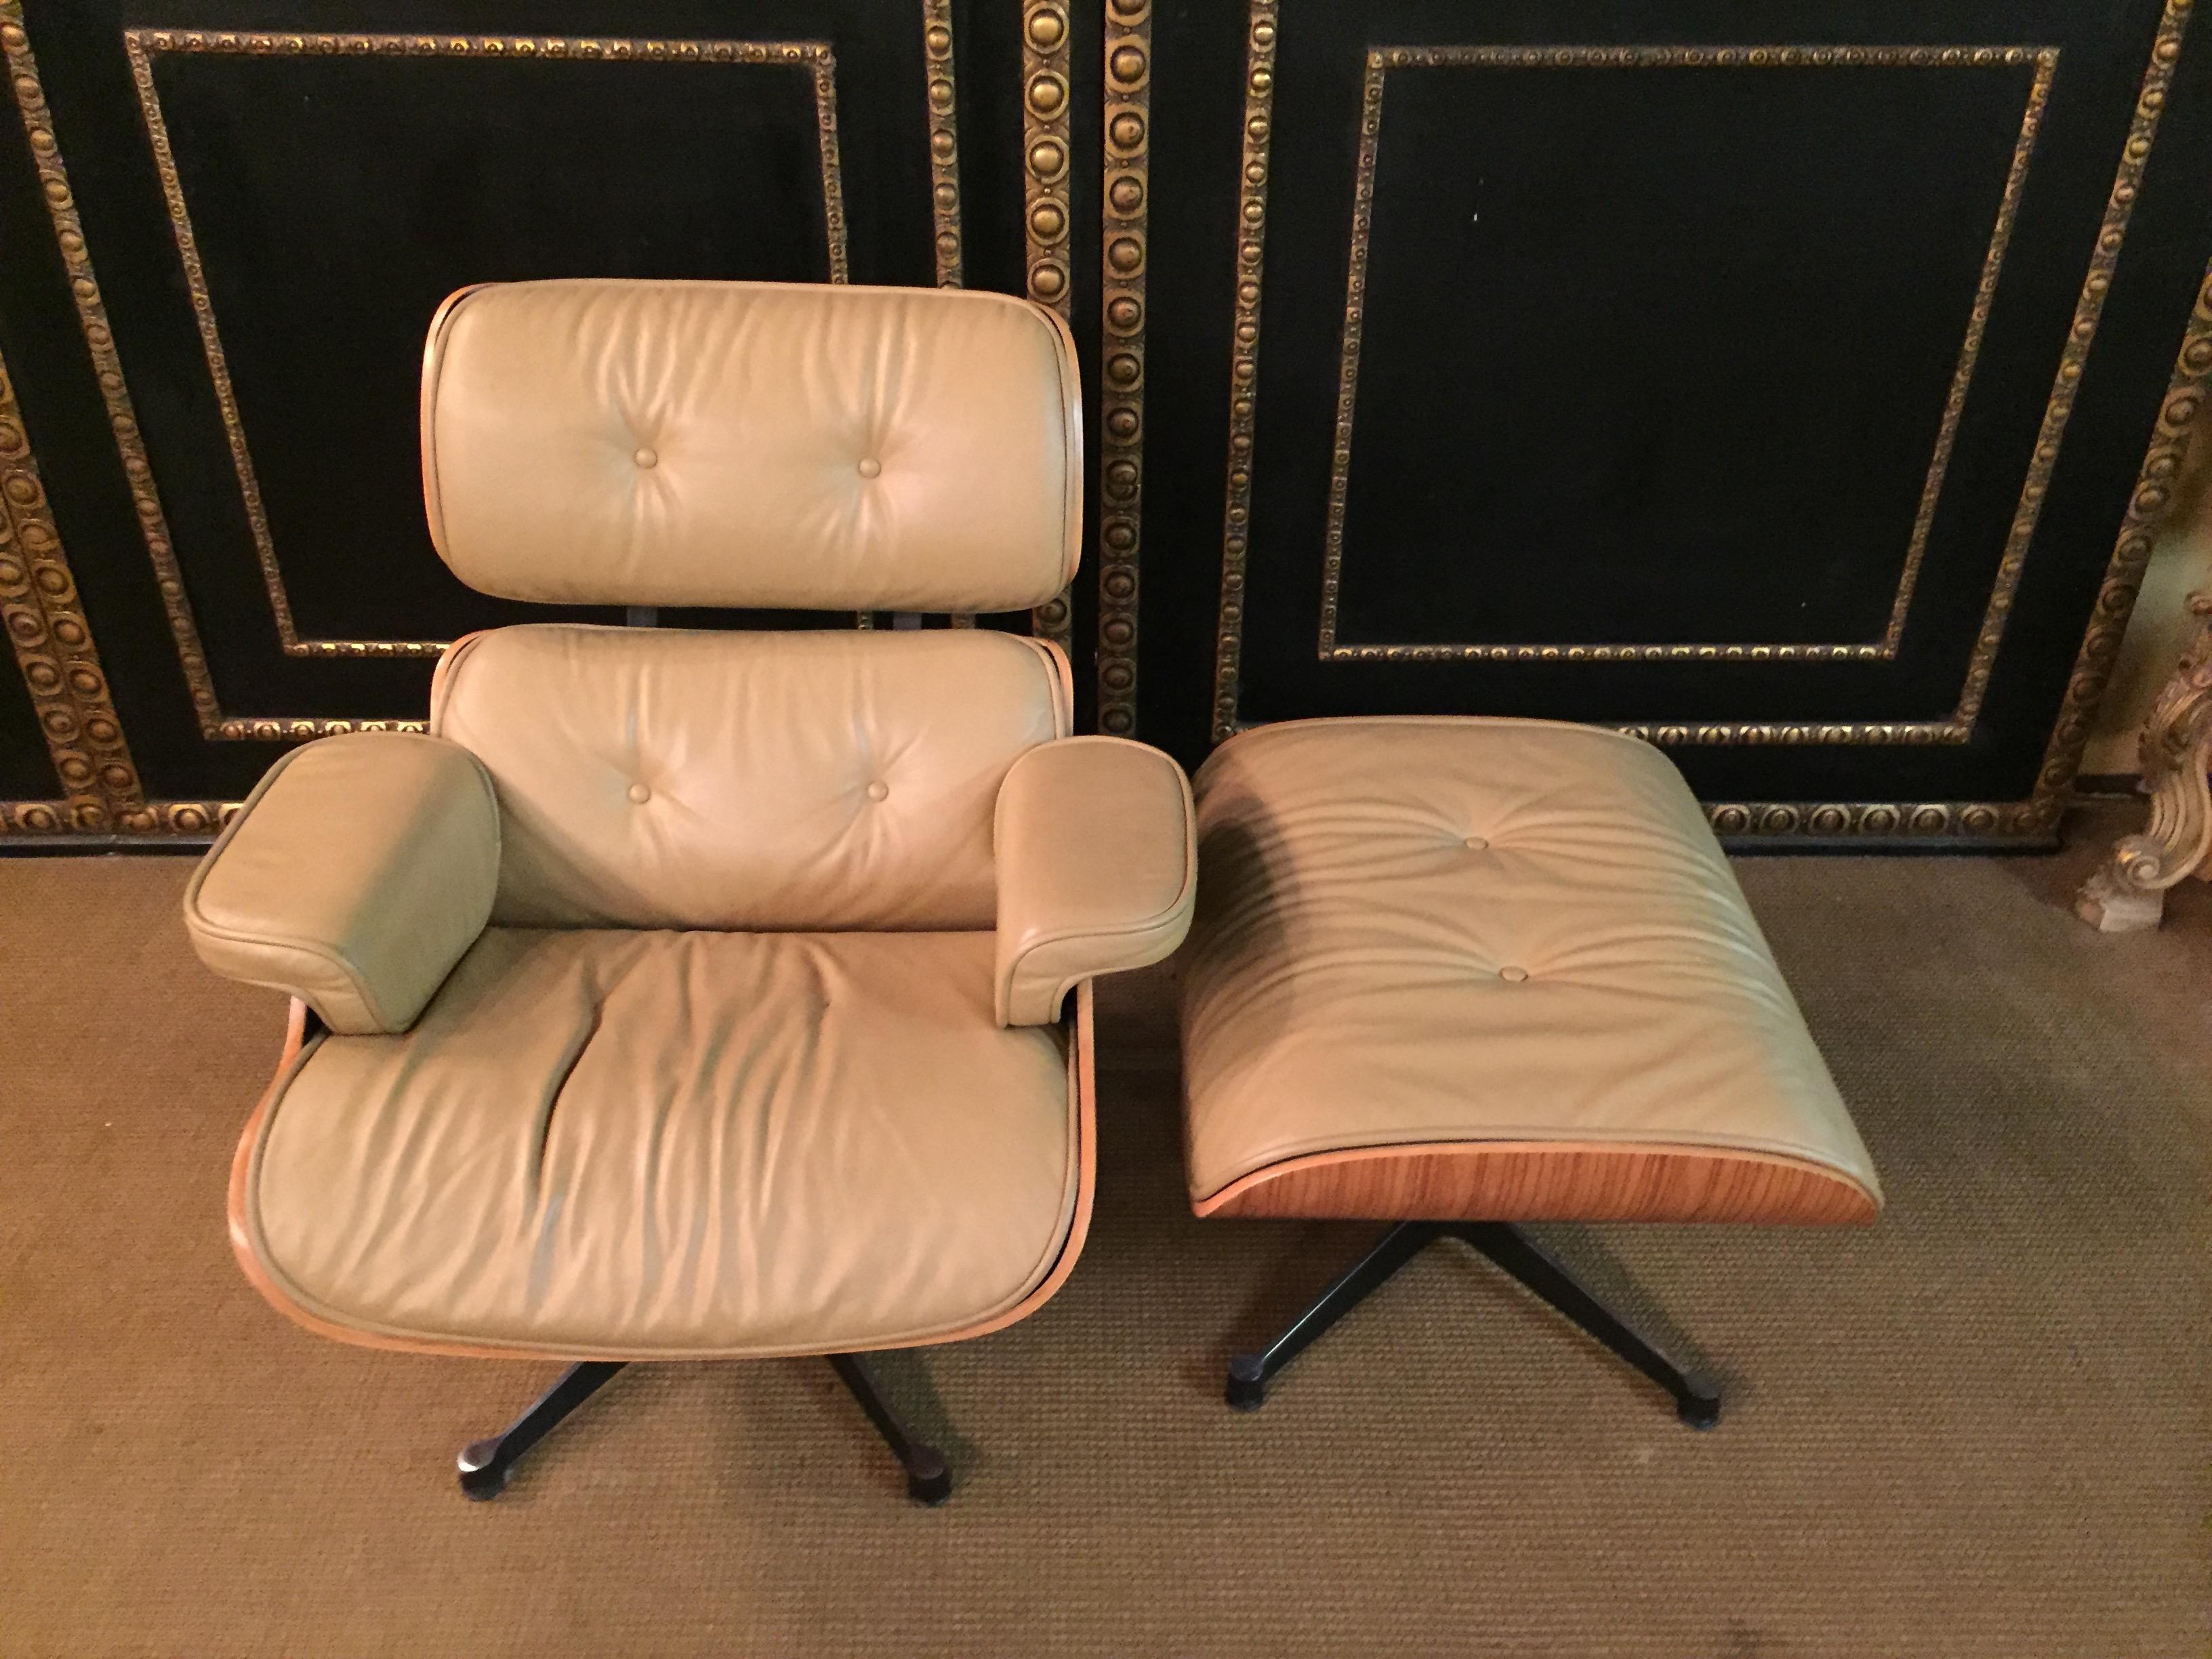 Metalwork Charles Eames Style Lounge Chair with Ottoman